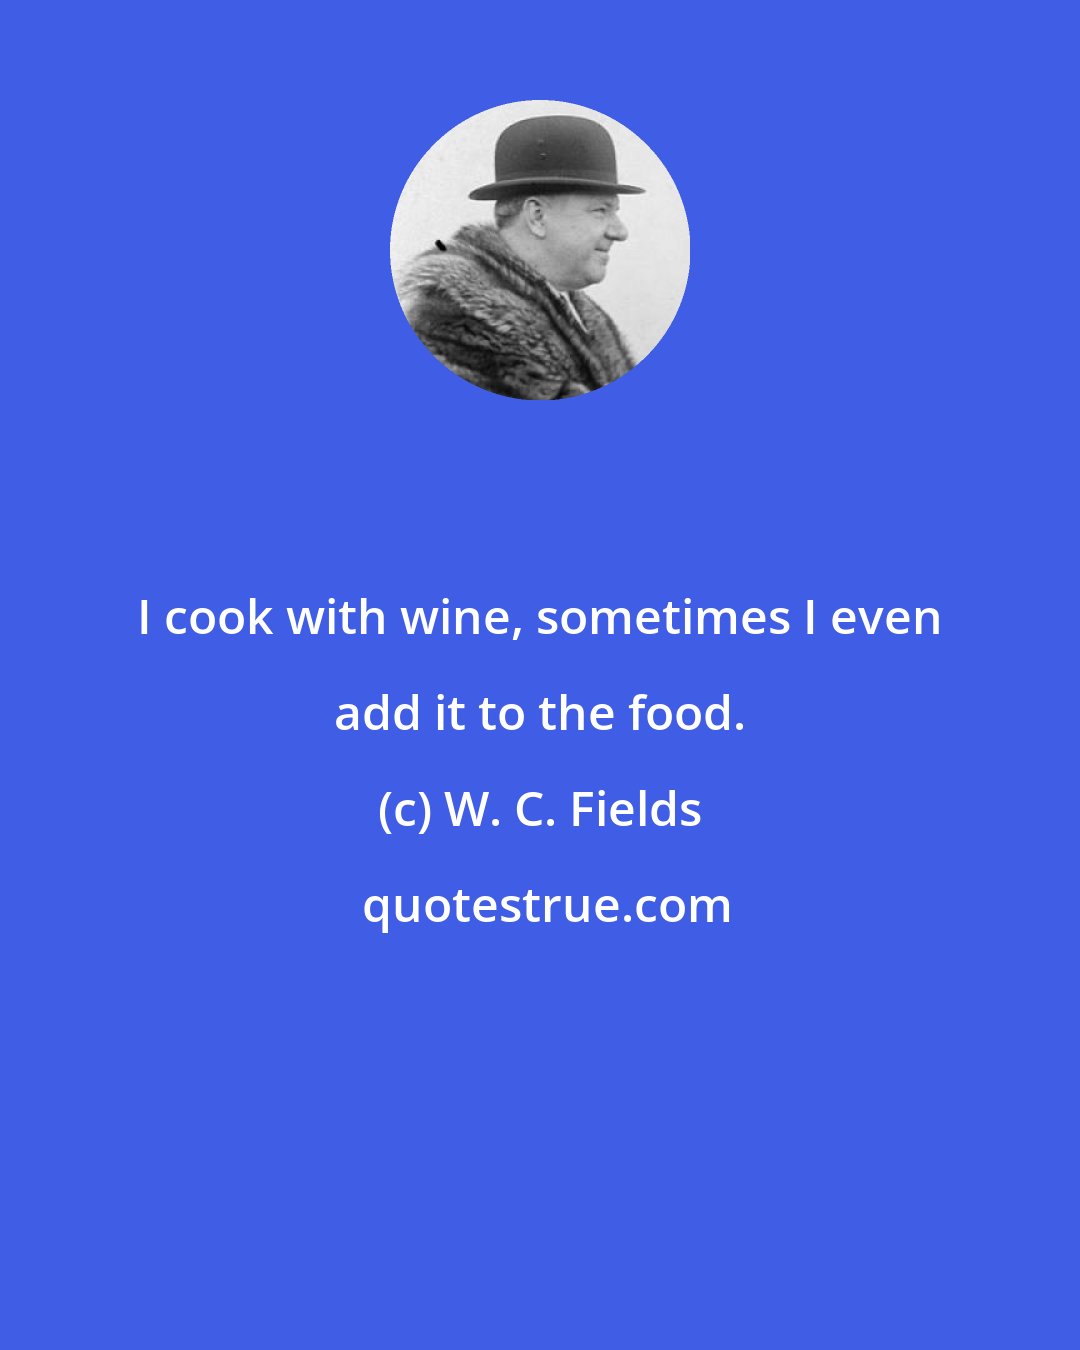 W. C. Fields: I cook with wine, sometimes I even add it to the food.